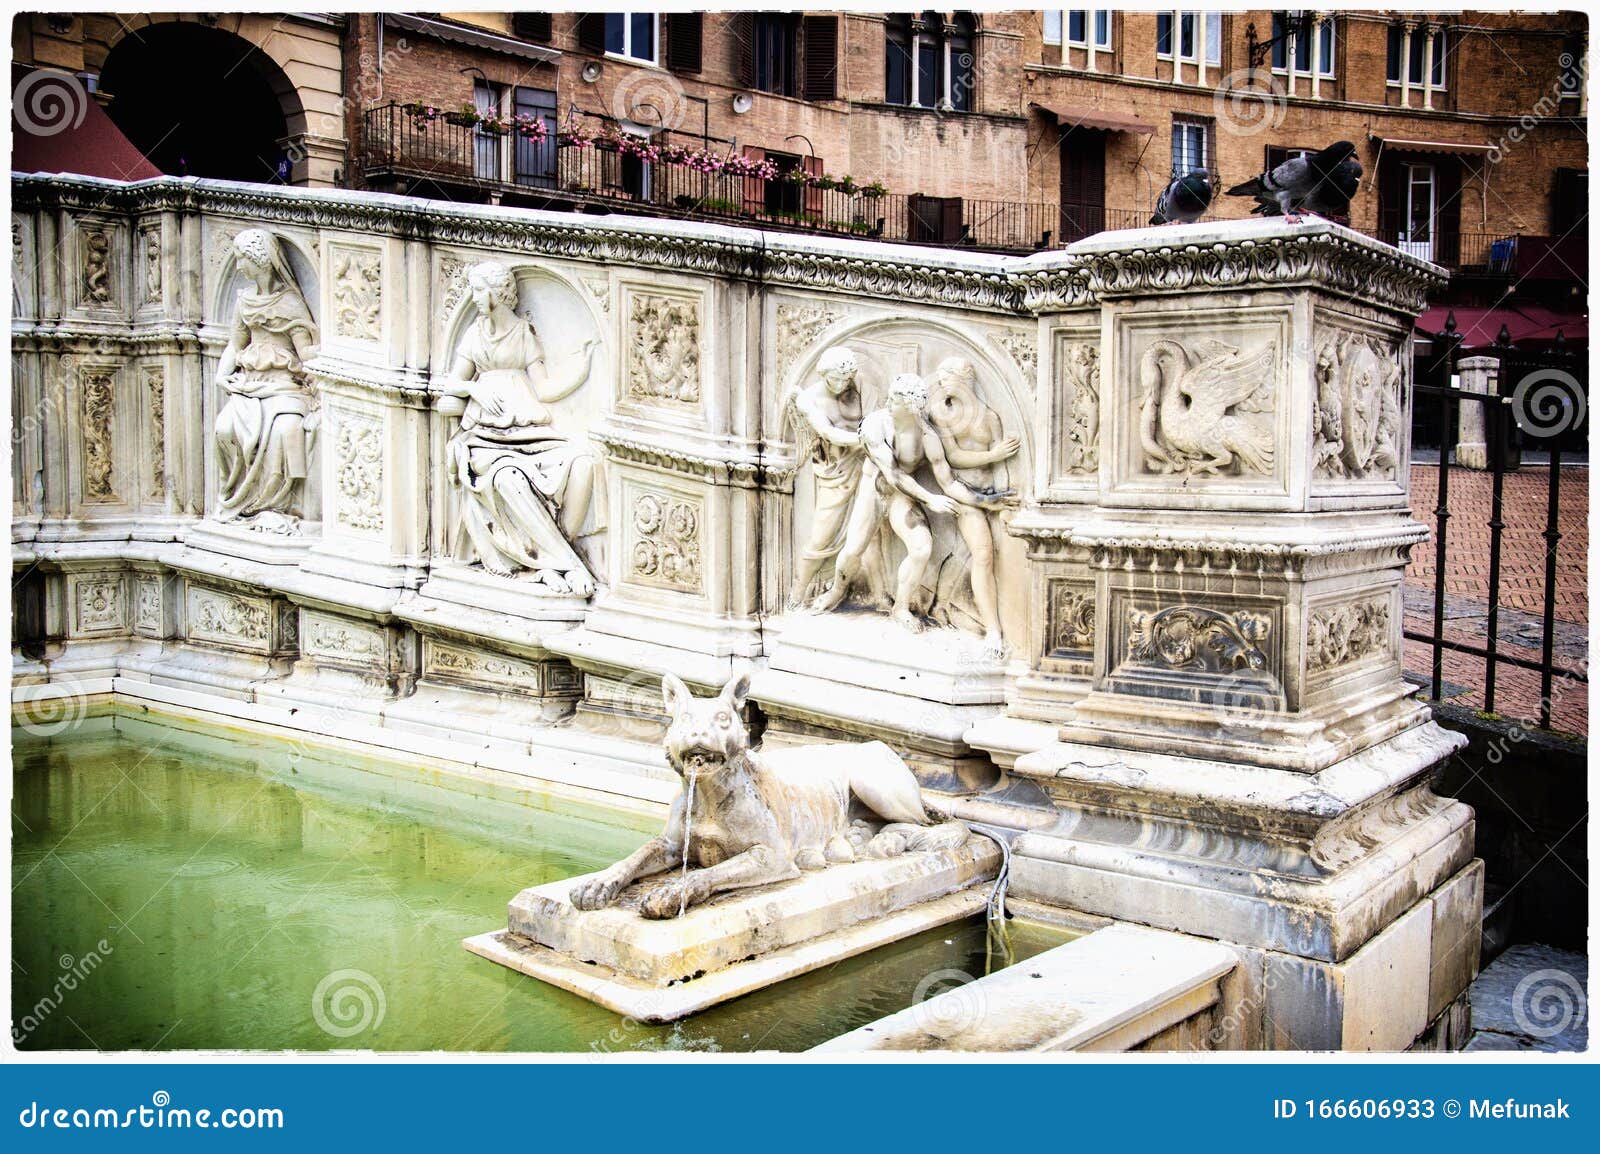 fountain of gaia, located on piazza del campo, siena, tuscany, italy with beautiful sculptures by jacopo della quercia